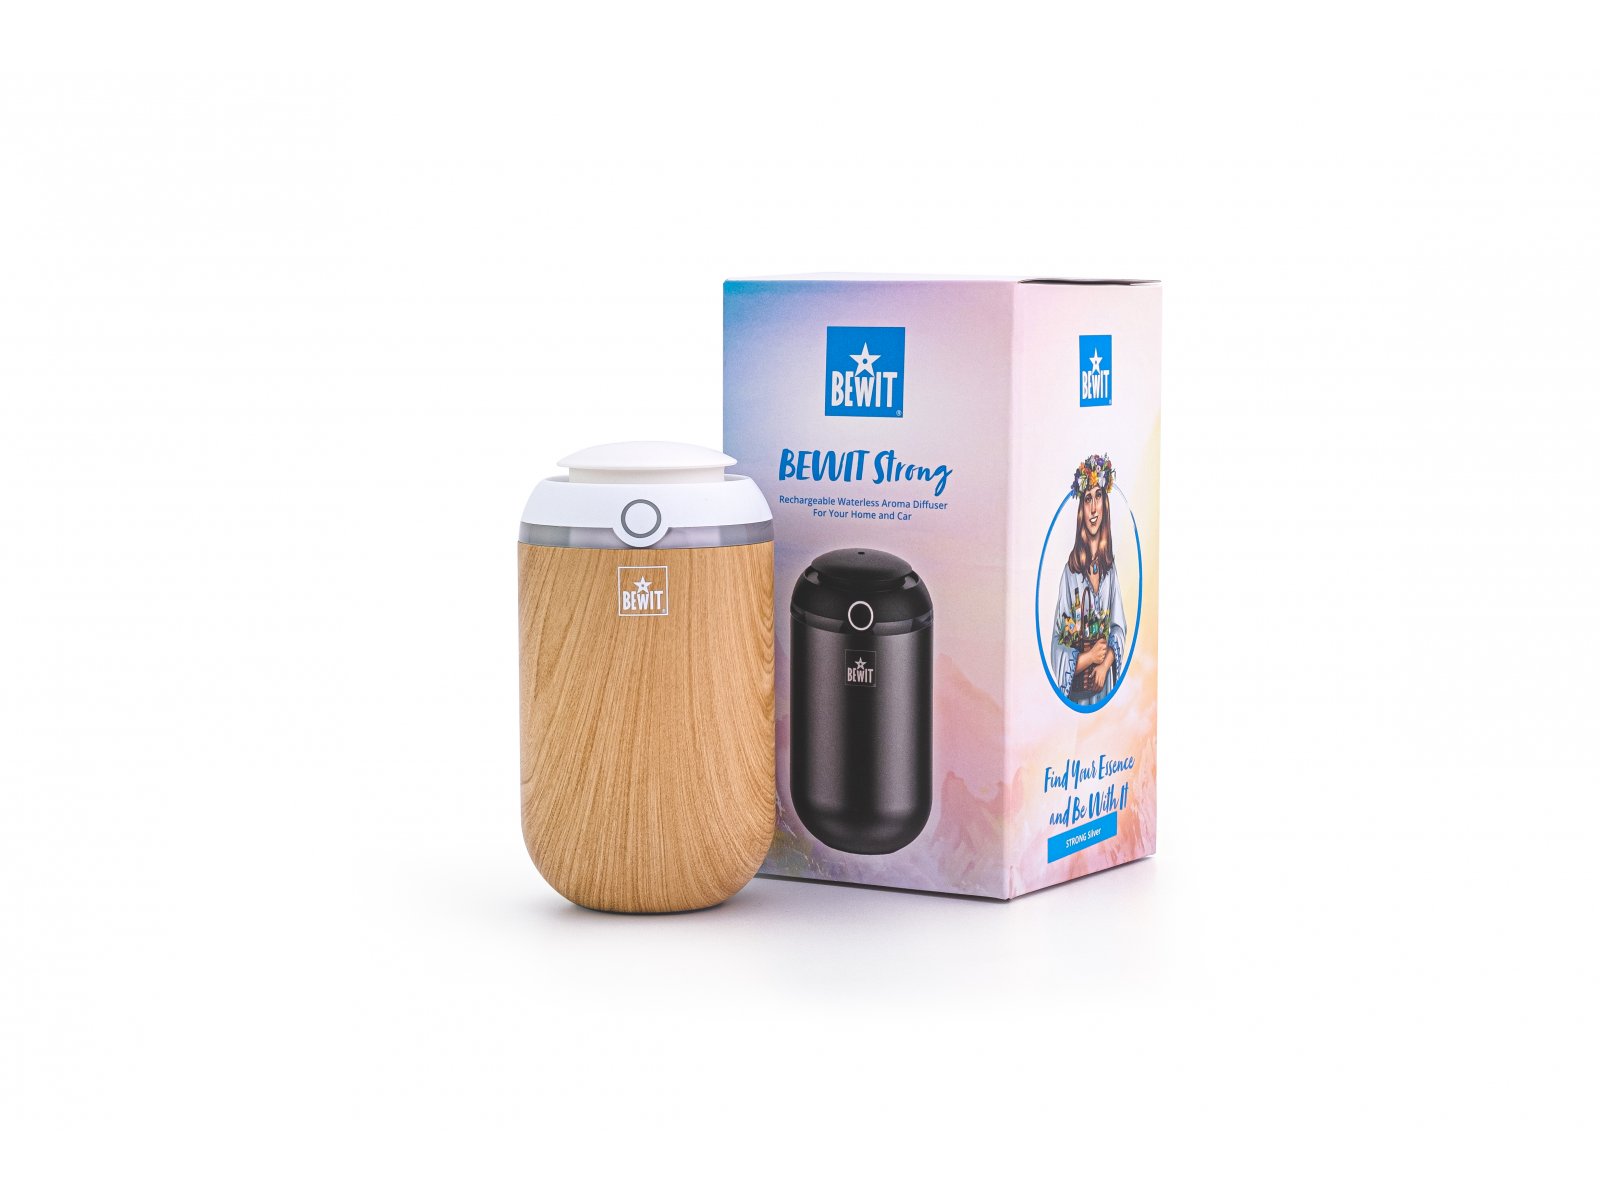 BEWIT® Aroma Diffusor wasserlos STRONG, helles Holz